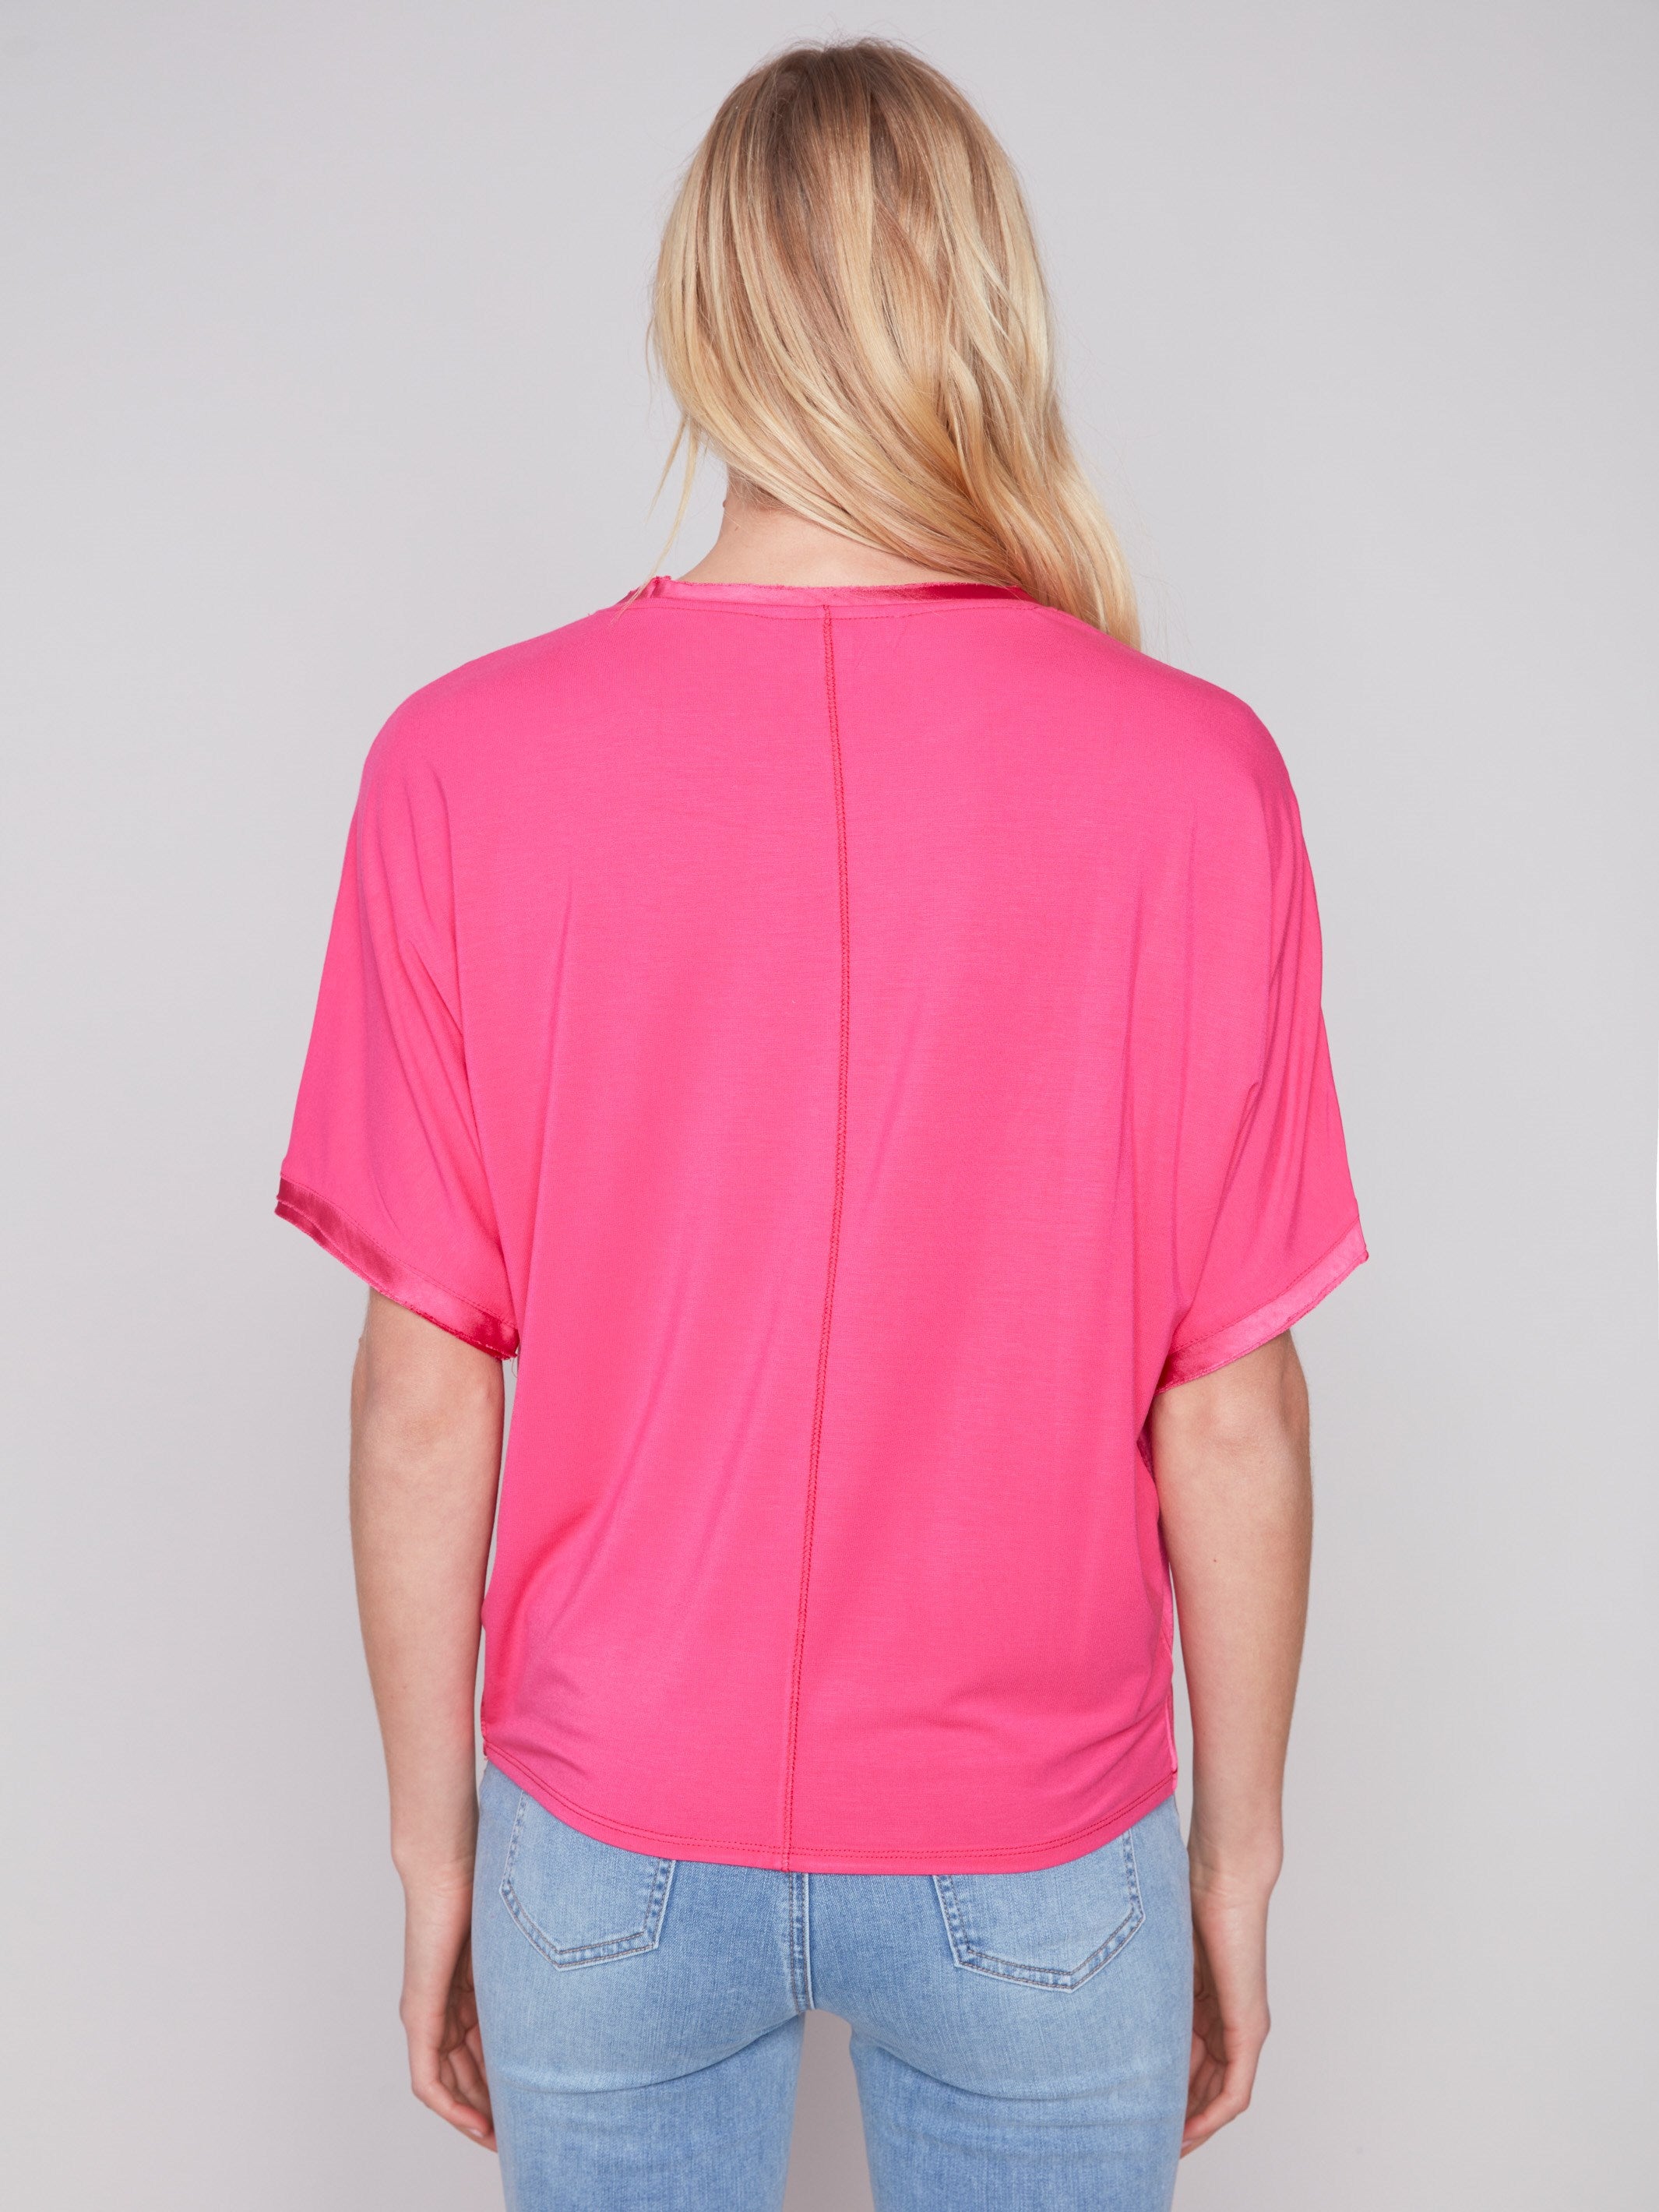 Satin Jersey Dolman Top - Punch - Charlie B Collection Canada - Image 2